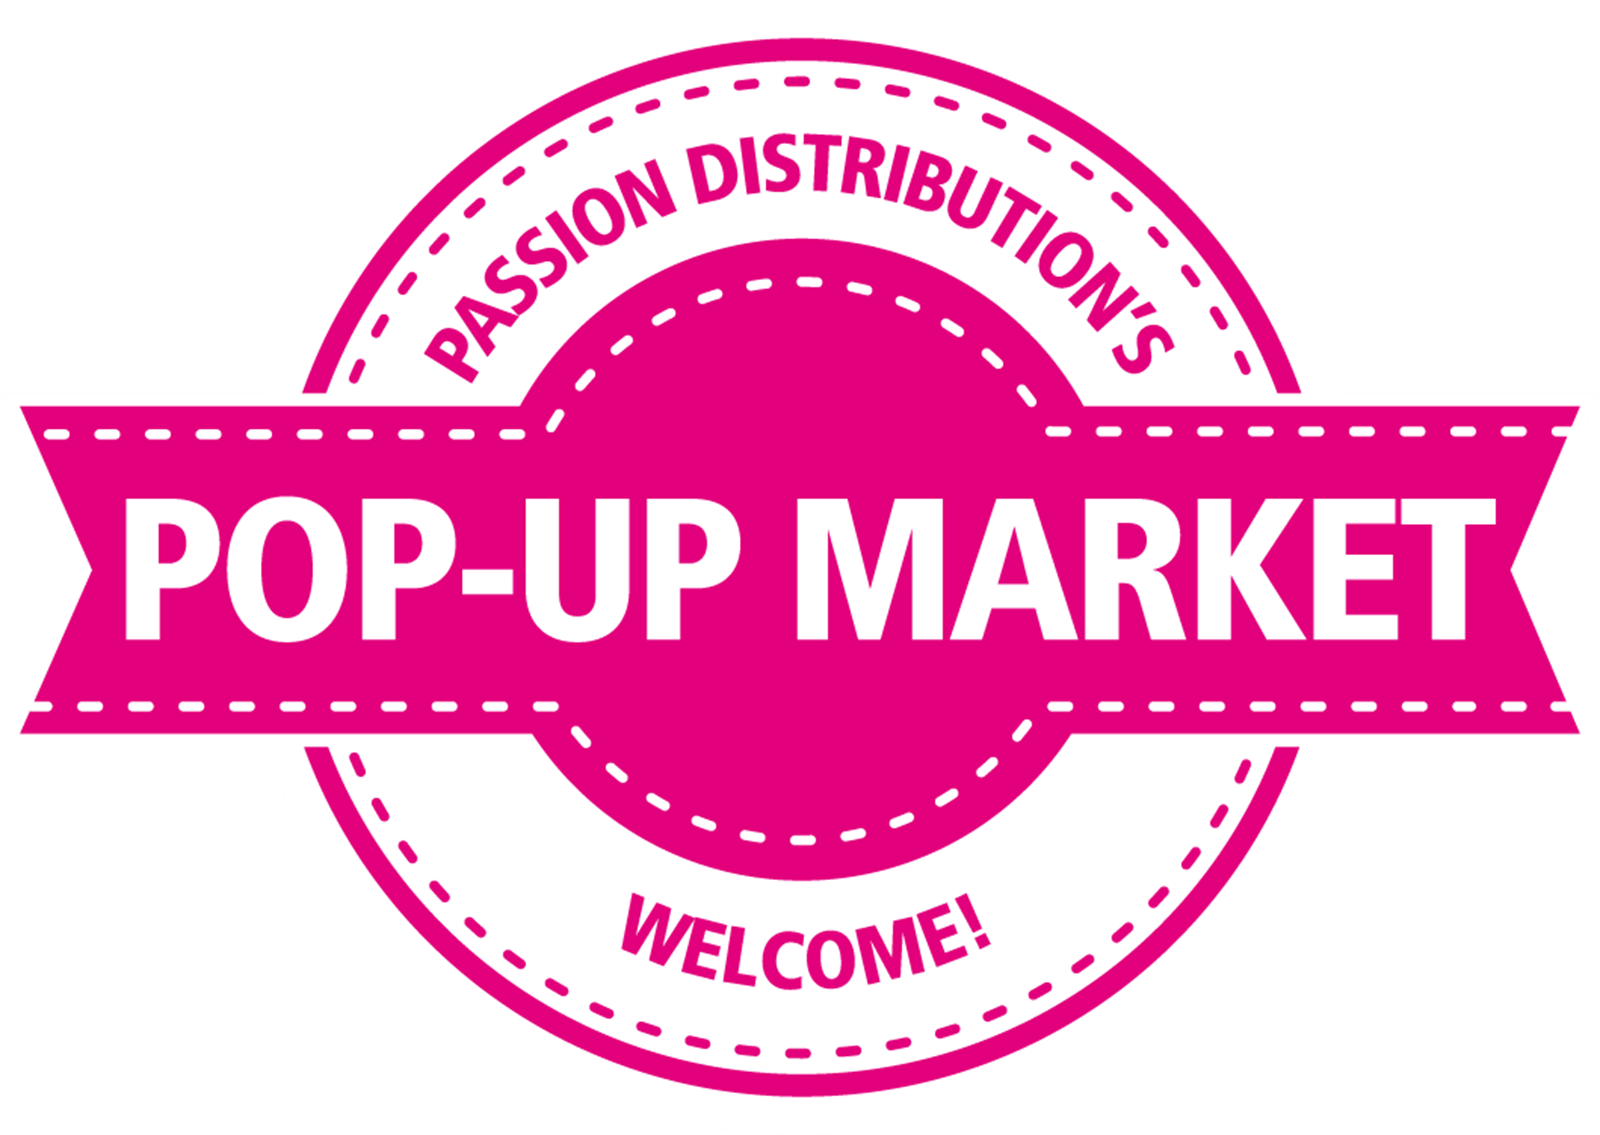 Passion Distribution pop up market and latest acquisitions announced 